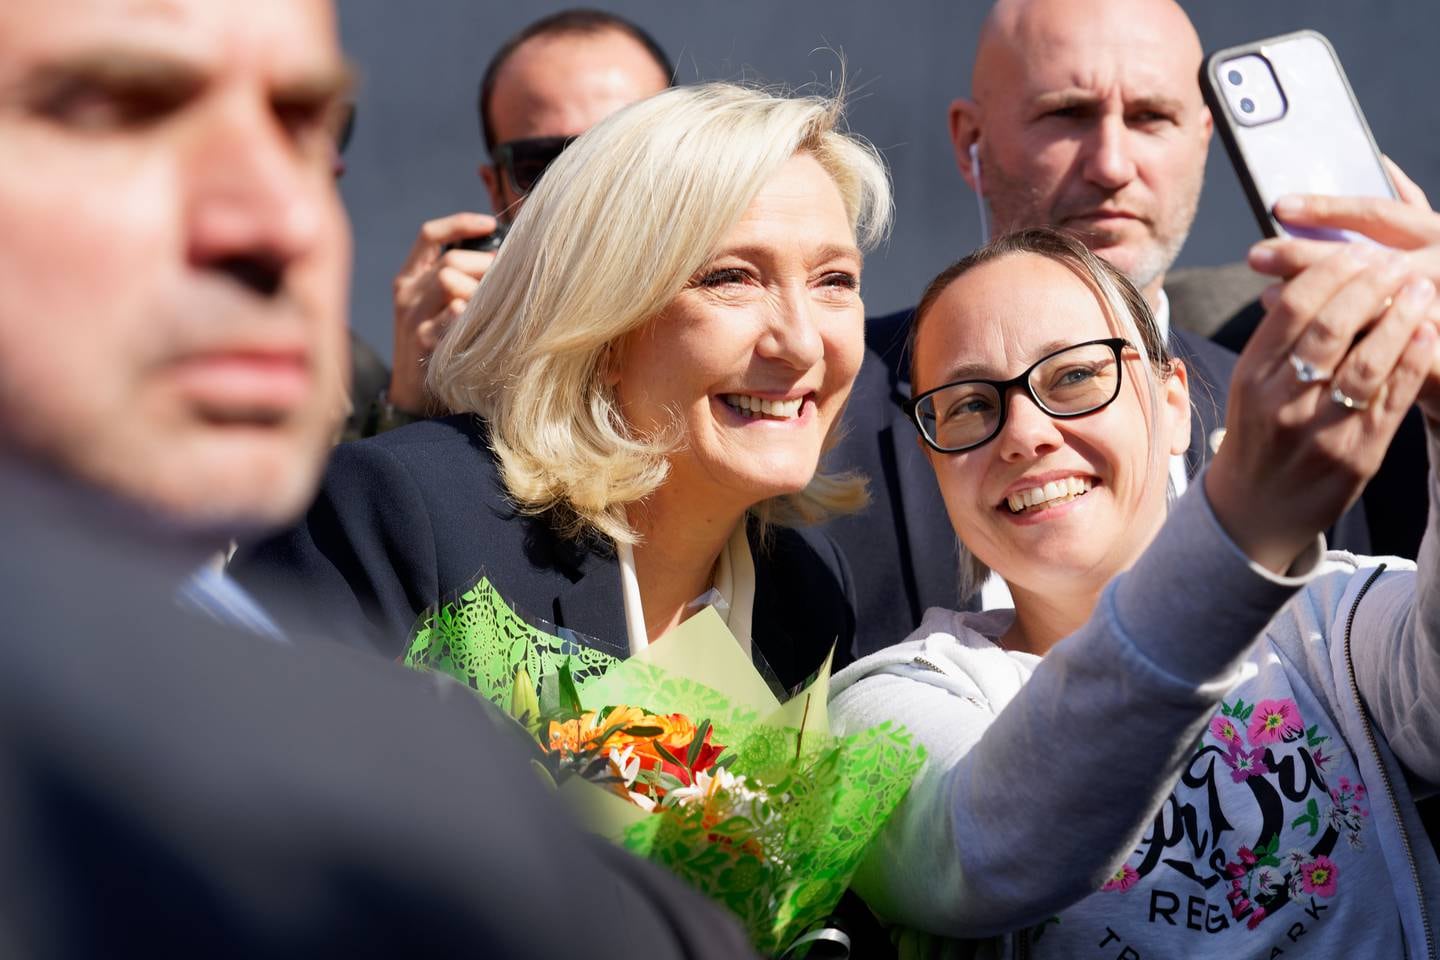 French far-right National Rally candidate Marine Le Pen poses with supporters as she leaves a polling station after casting her ballot for the second round of the presidential election in Henin-Beaumont on Sunday. Getty Images